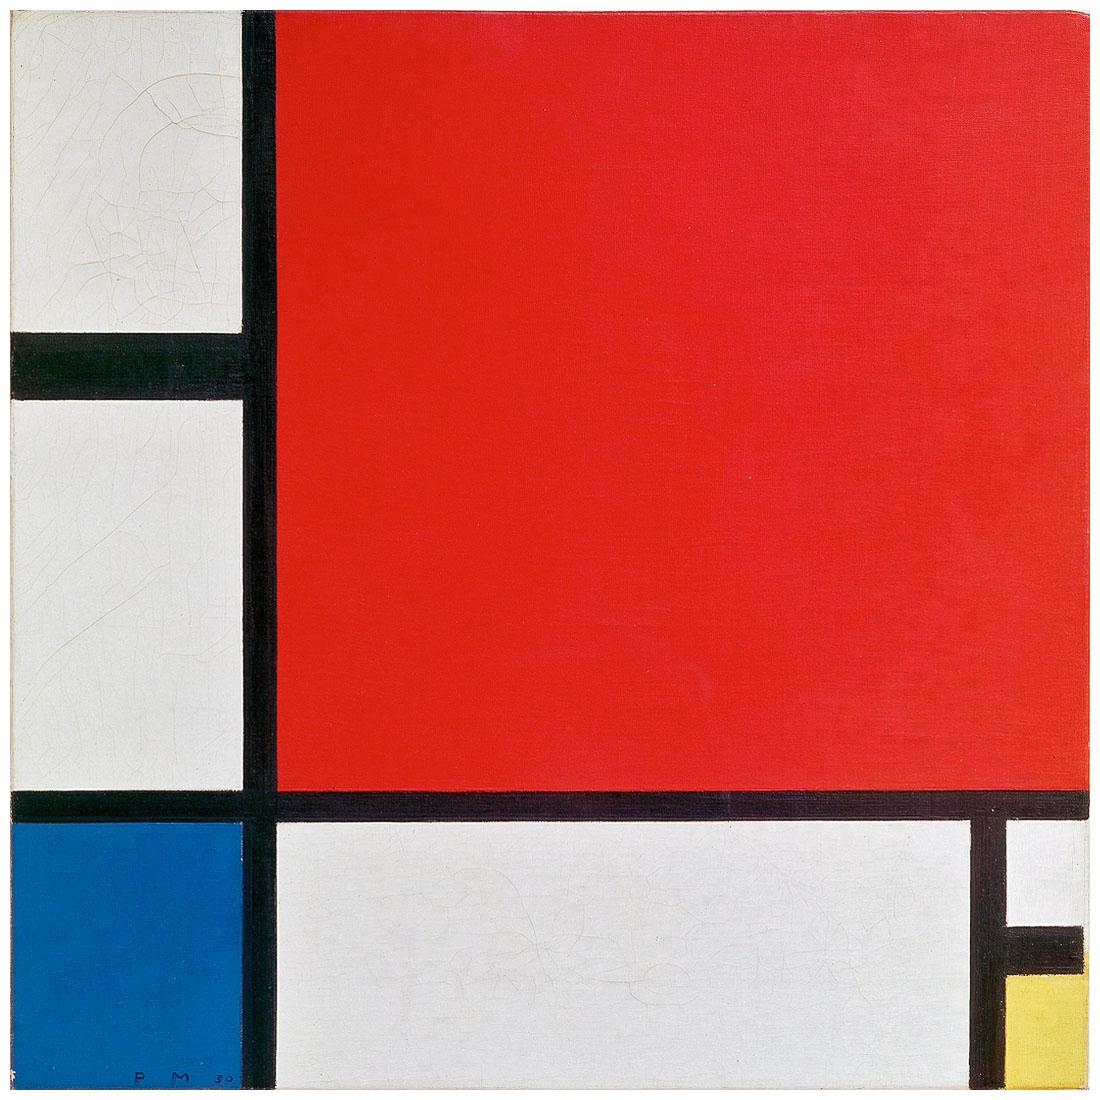 Piet Mondriaan. Composition with Red, Blue and Yellow. 1930. Kunsthaus Zurich